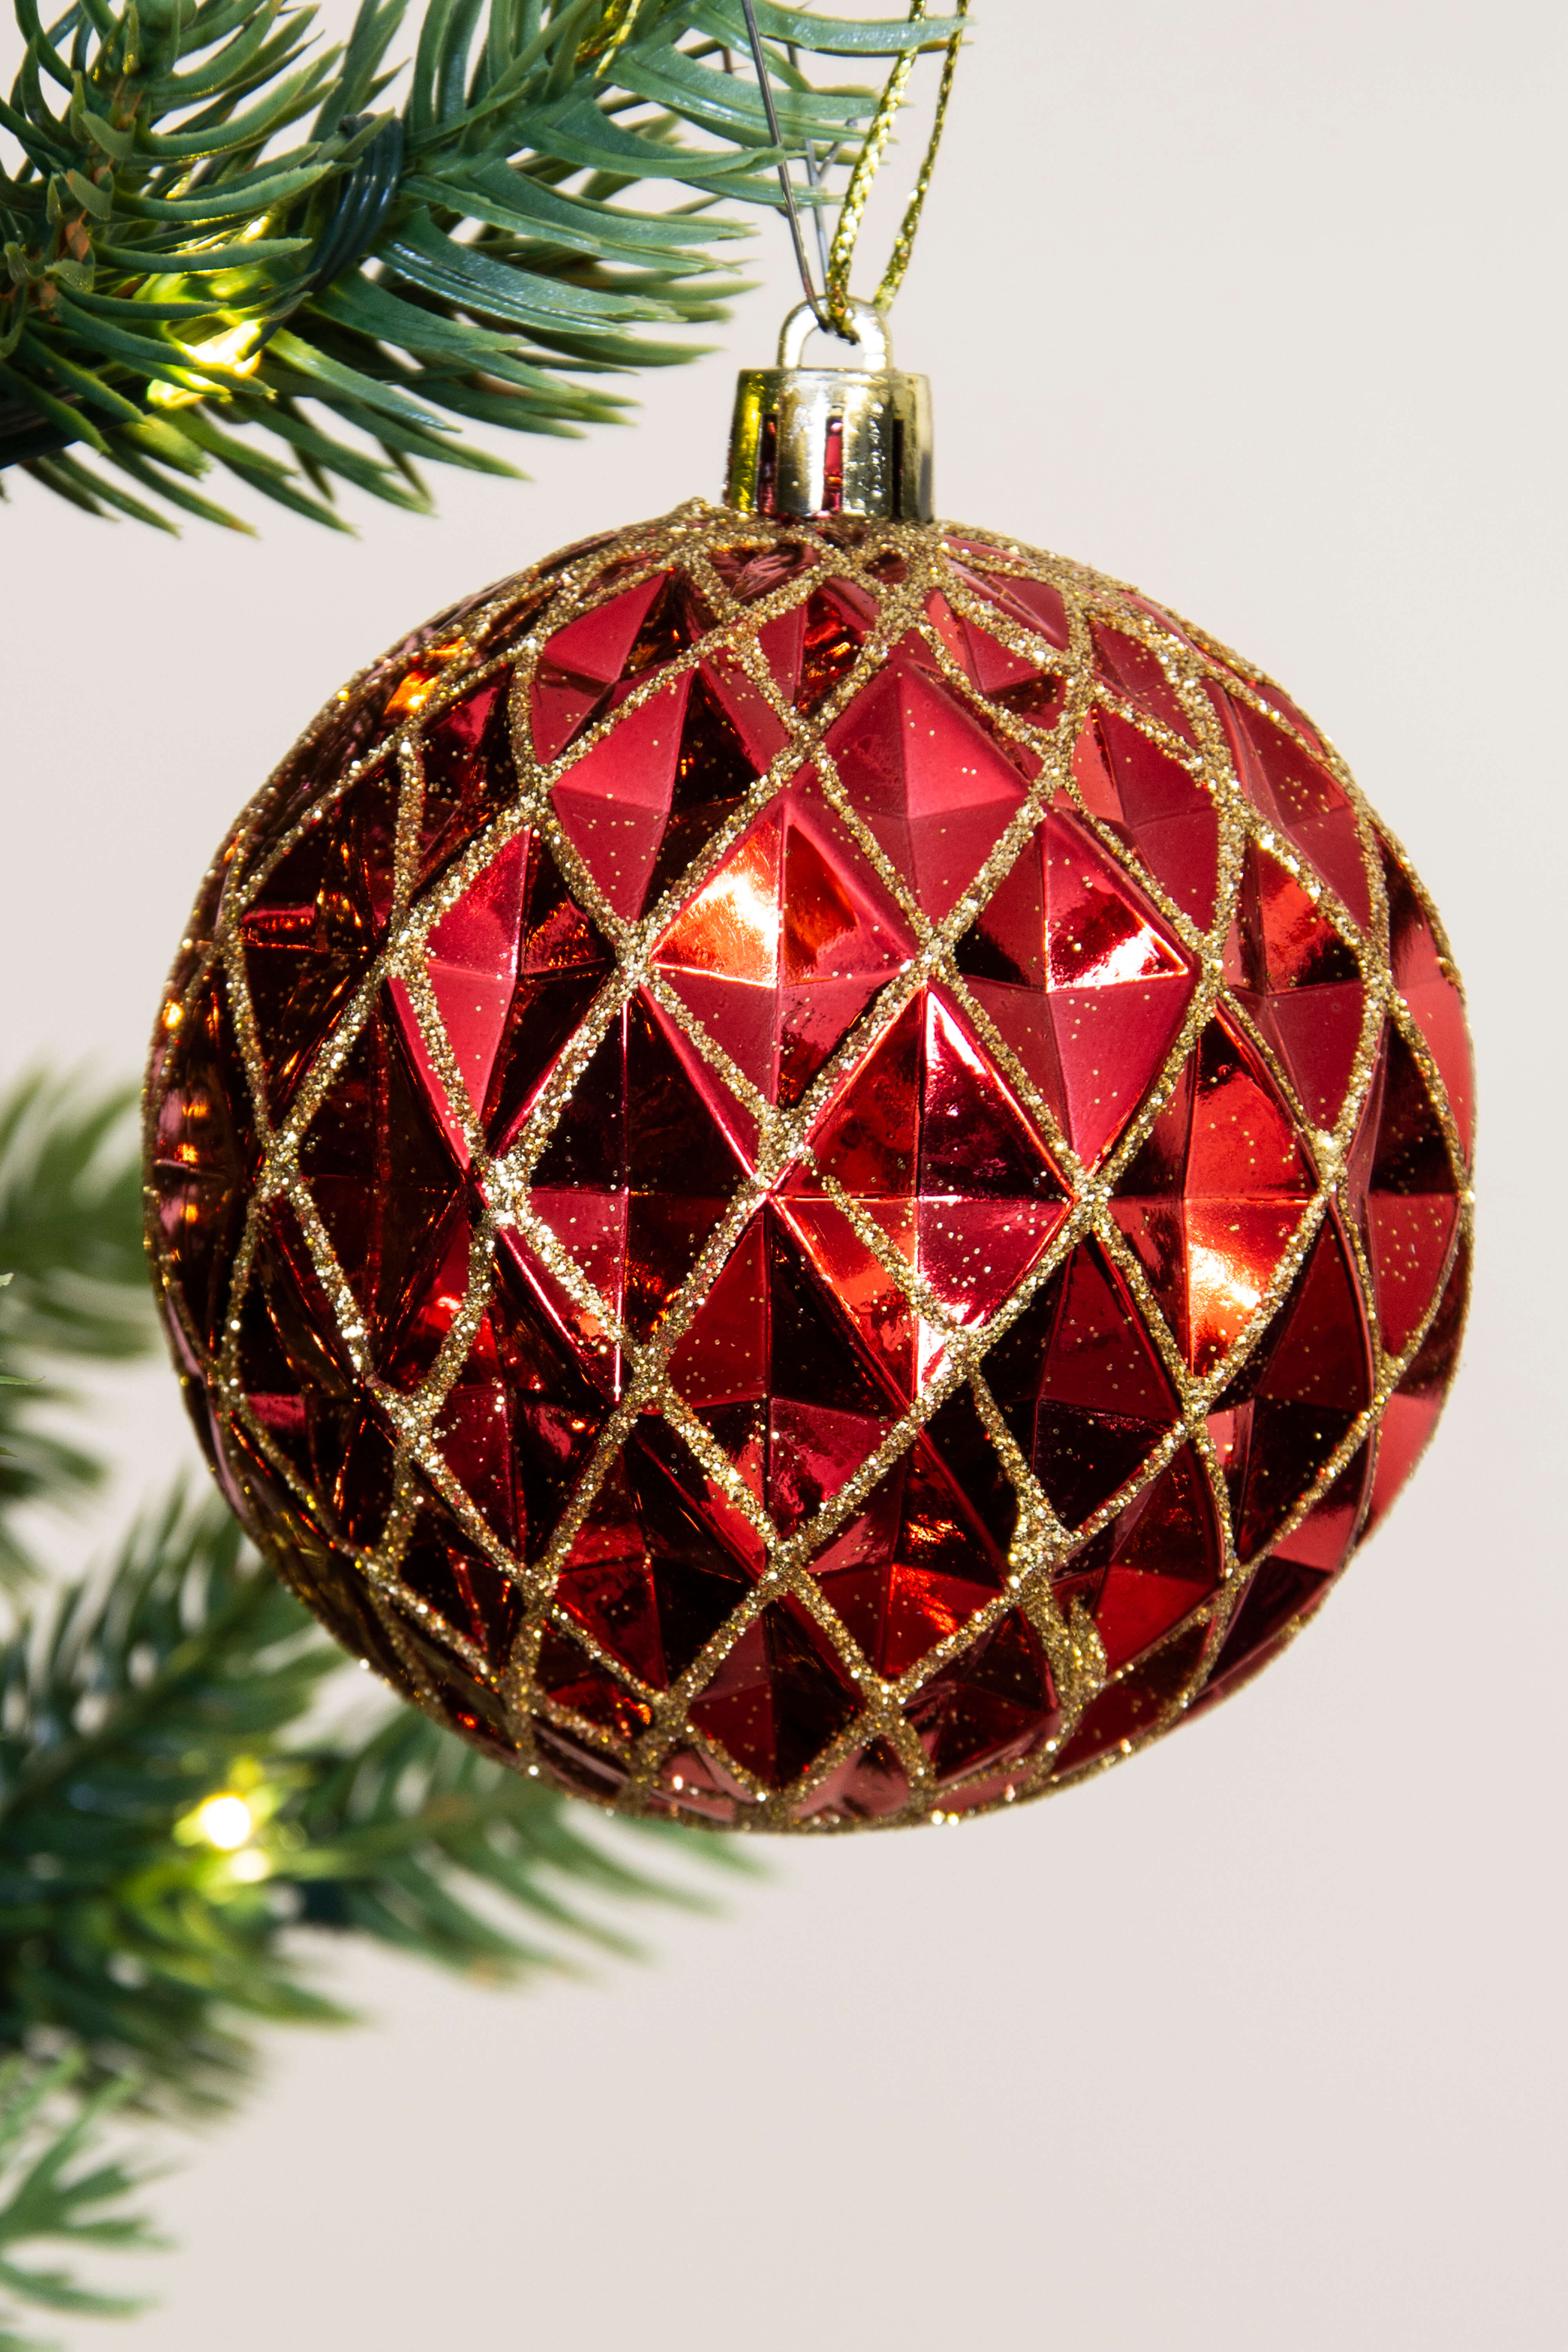 The Red & Gold Baubles 16pc Feature Set | Christmas Tree Decorations